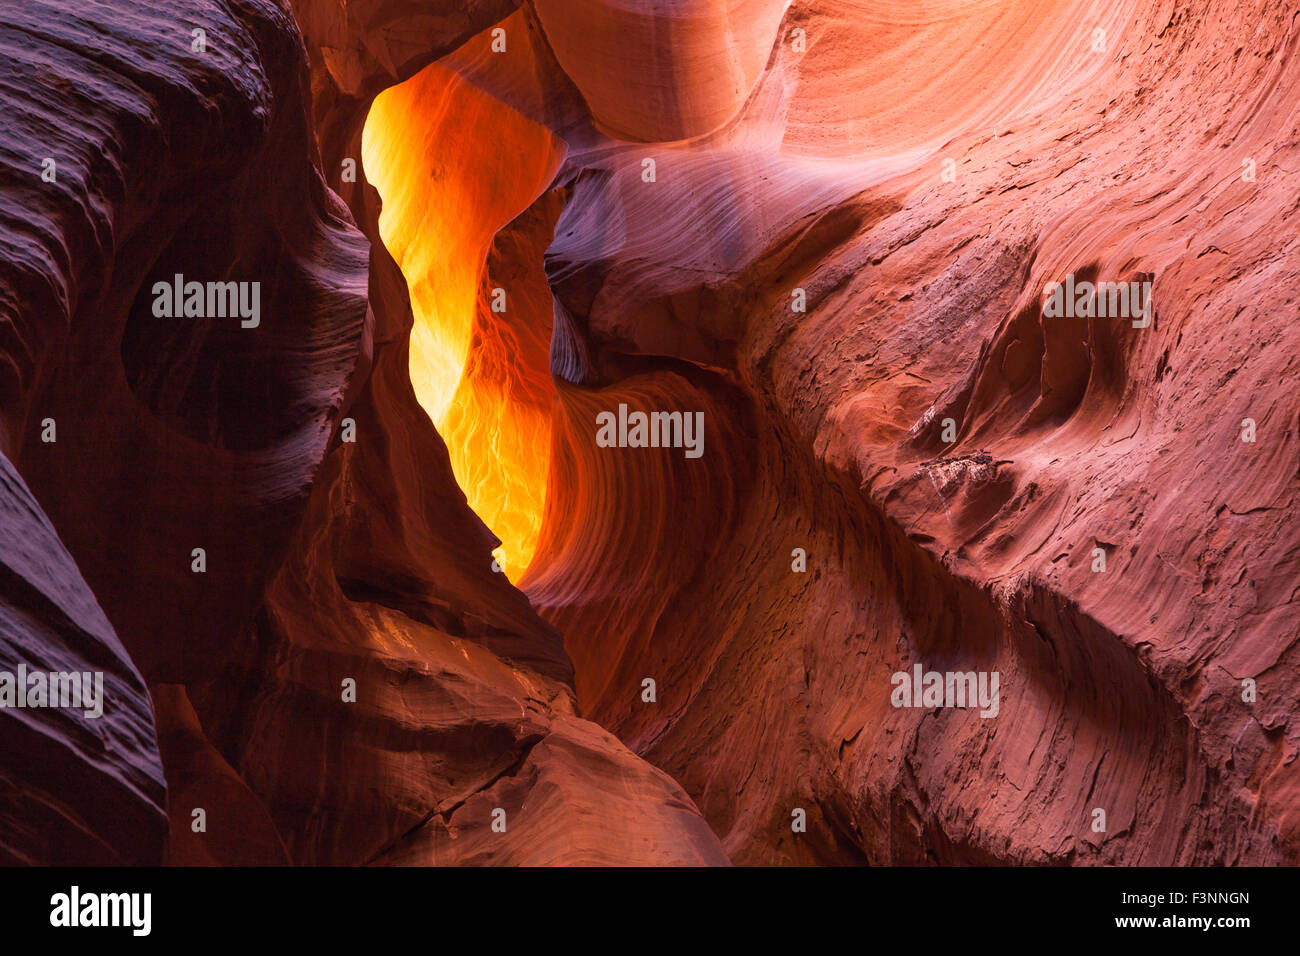 Colorful ancient sandstone walls eroded by time and water to create smooth layers in Canyon X in Page, Arizona. Stock Photo